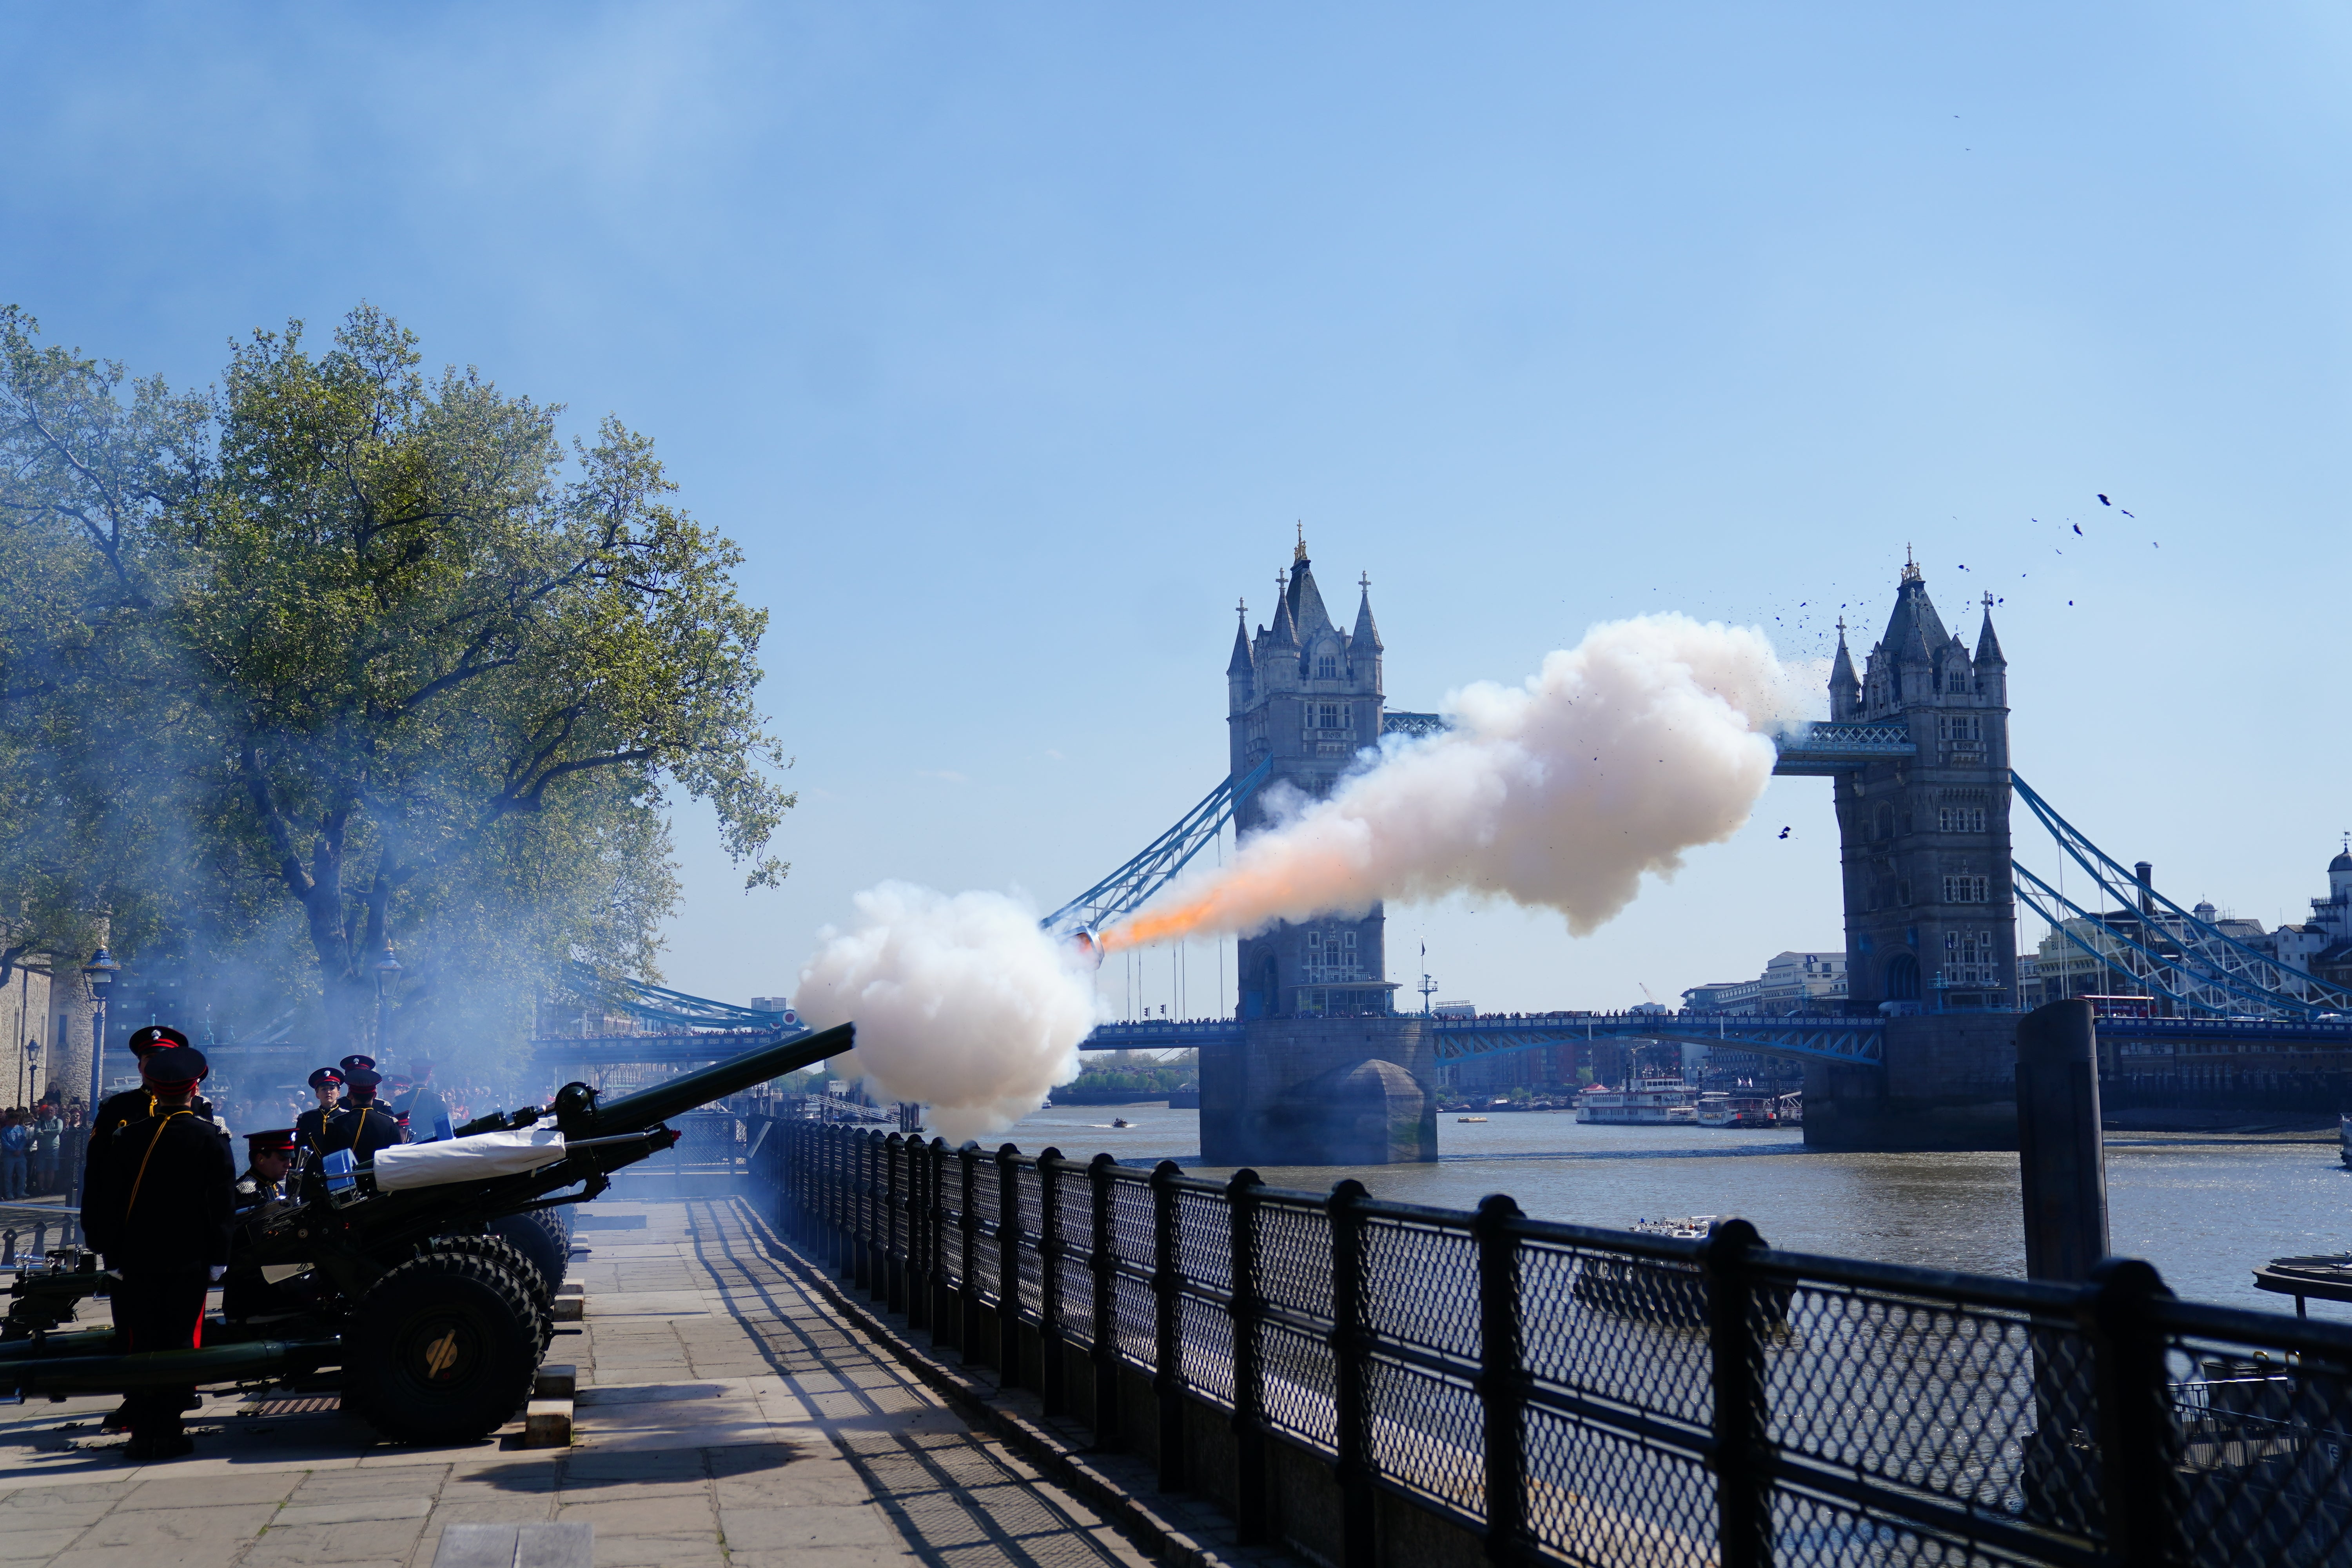 The Honourable Artillery Company (HAC), the City of London’s Reserve Army Regiment, fires a 62-gun Royal Salute at the Tower of London to mark the 96th birthday of the Queen (Victoria Jones/PA)